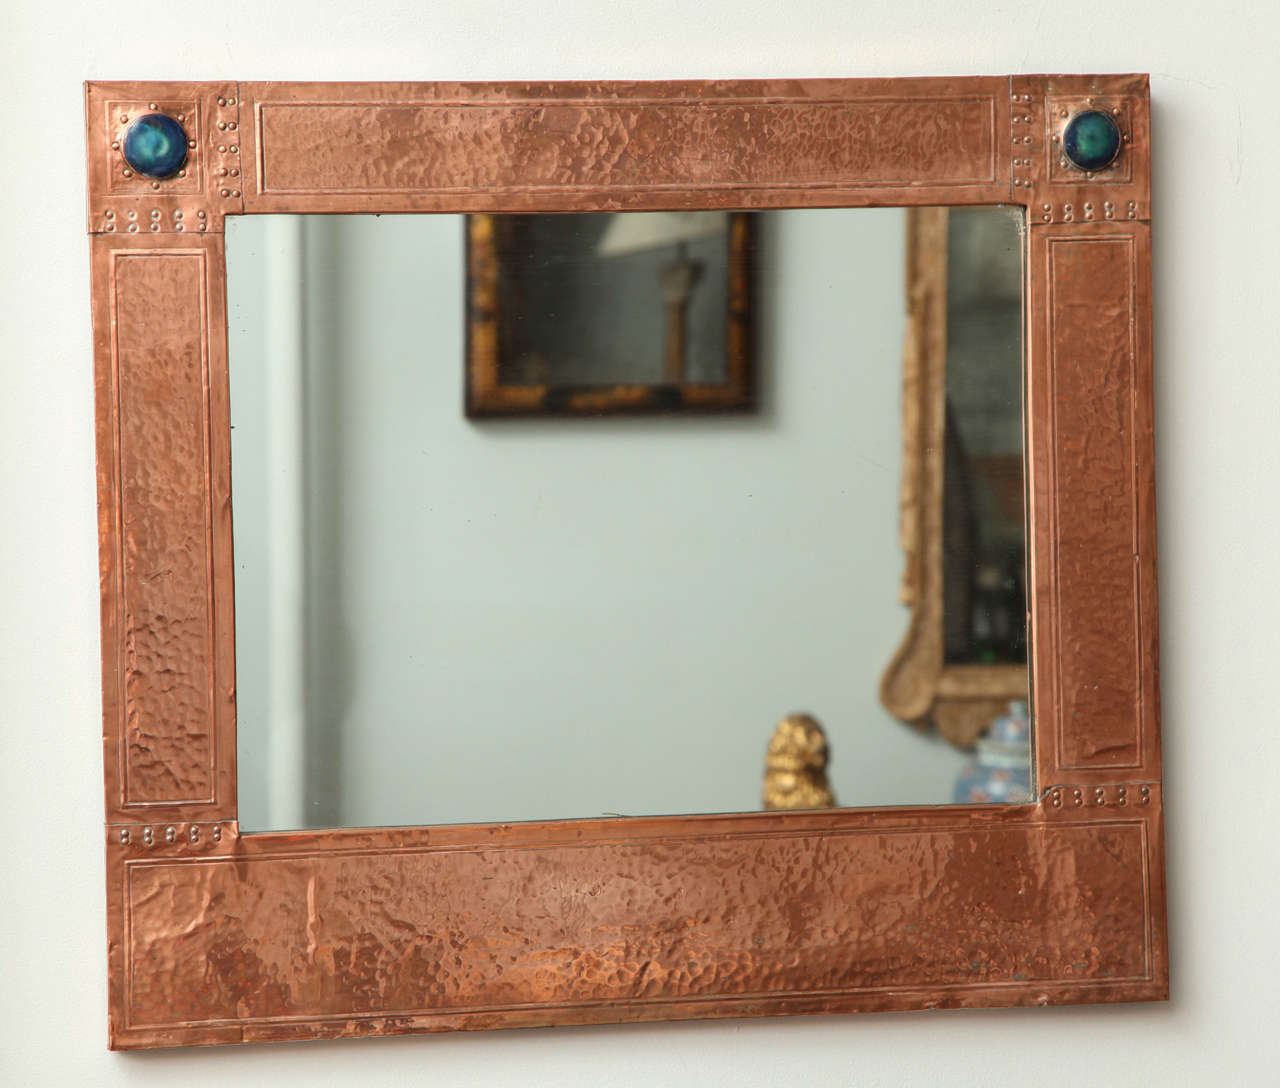 Good English Arts and Crafts hammered copper mirror probably by Liberty and Co, circa 1890, having hand hammered paneled sides with double row of riveted seams, the two upper corners with enamel 